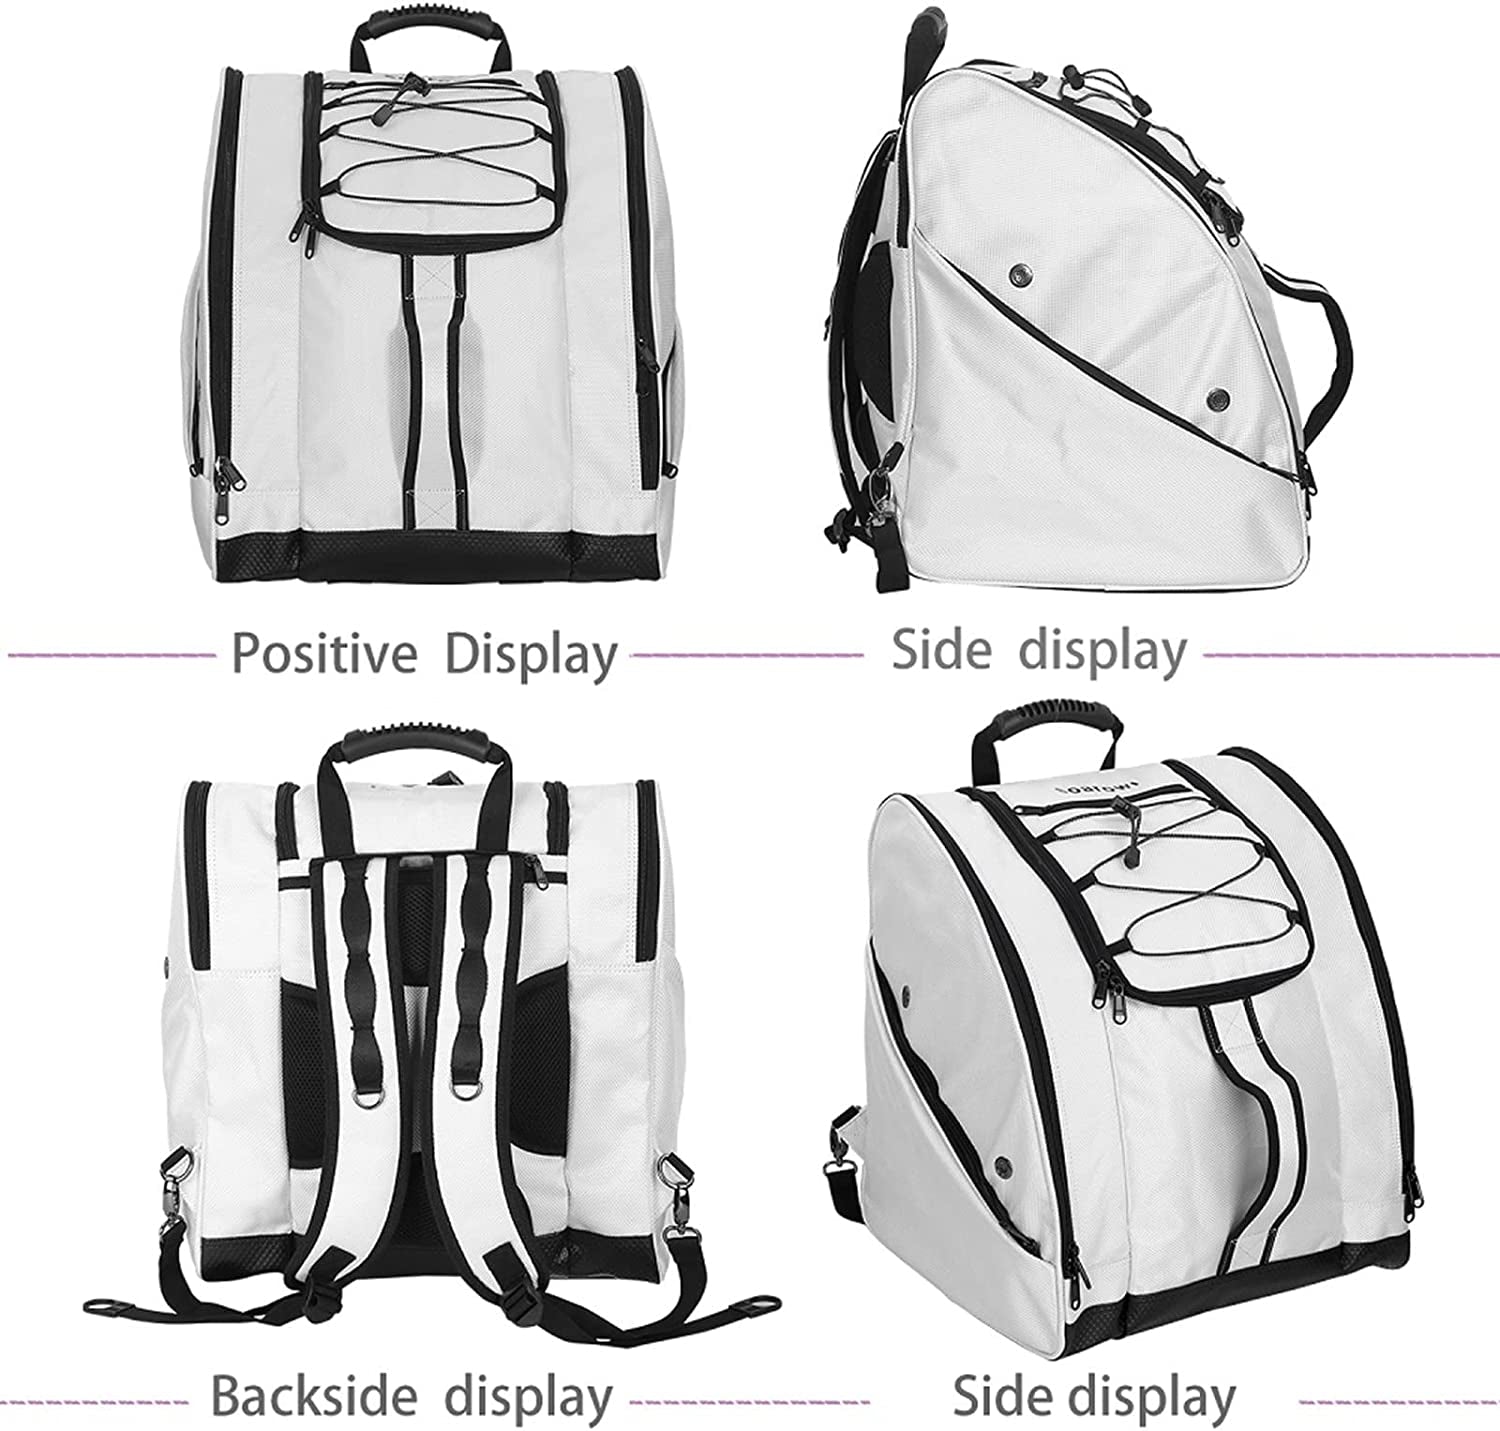 Soarowl Ski Boot Bag –Skiing Travel Luggage, Excellent for Travel with Waterproof Exterior & Bottom - for Men, Women and Youth